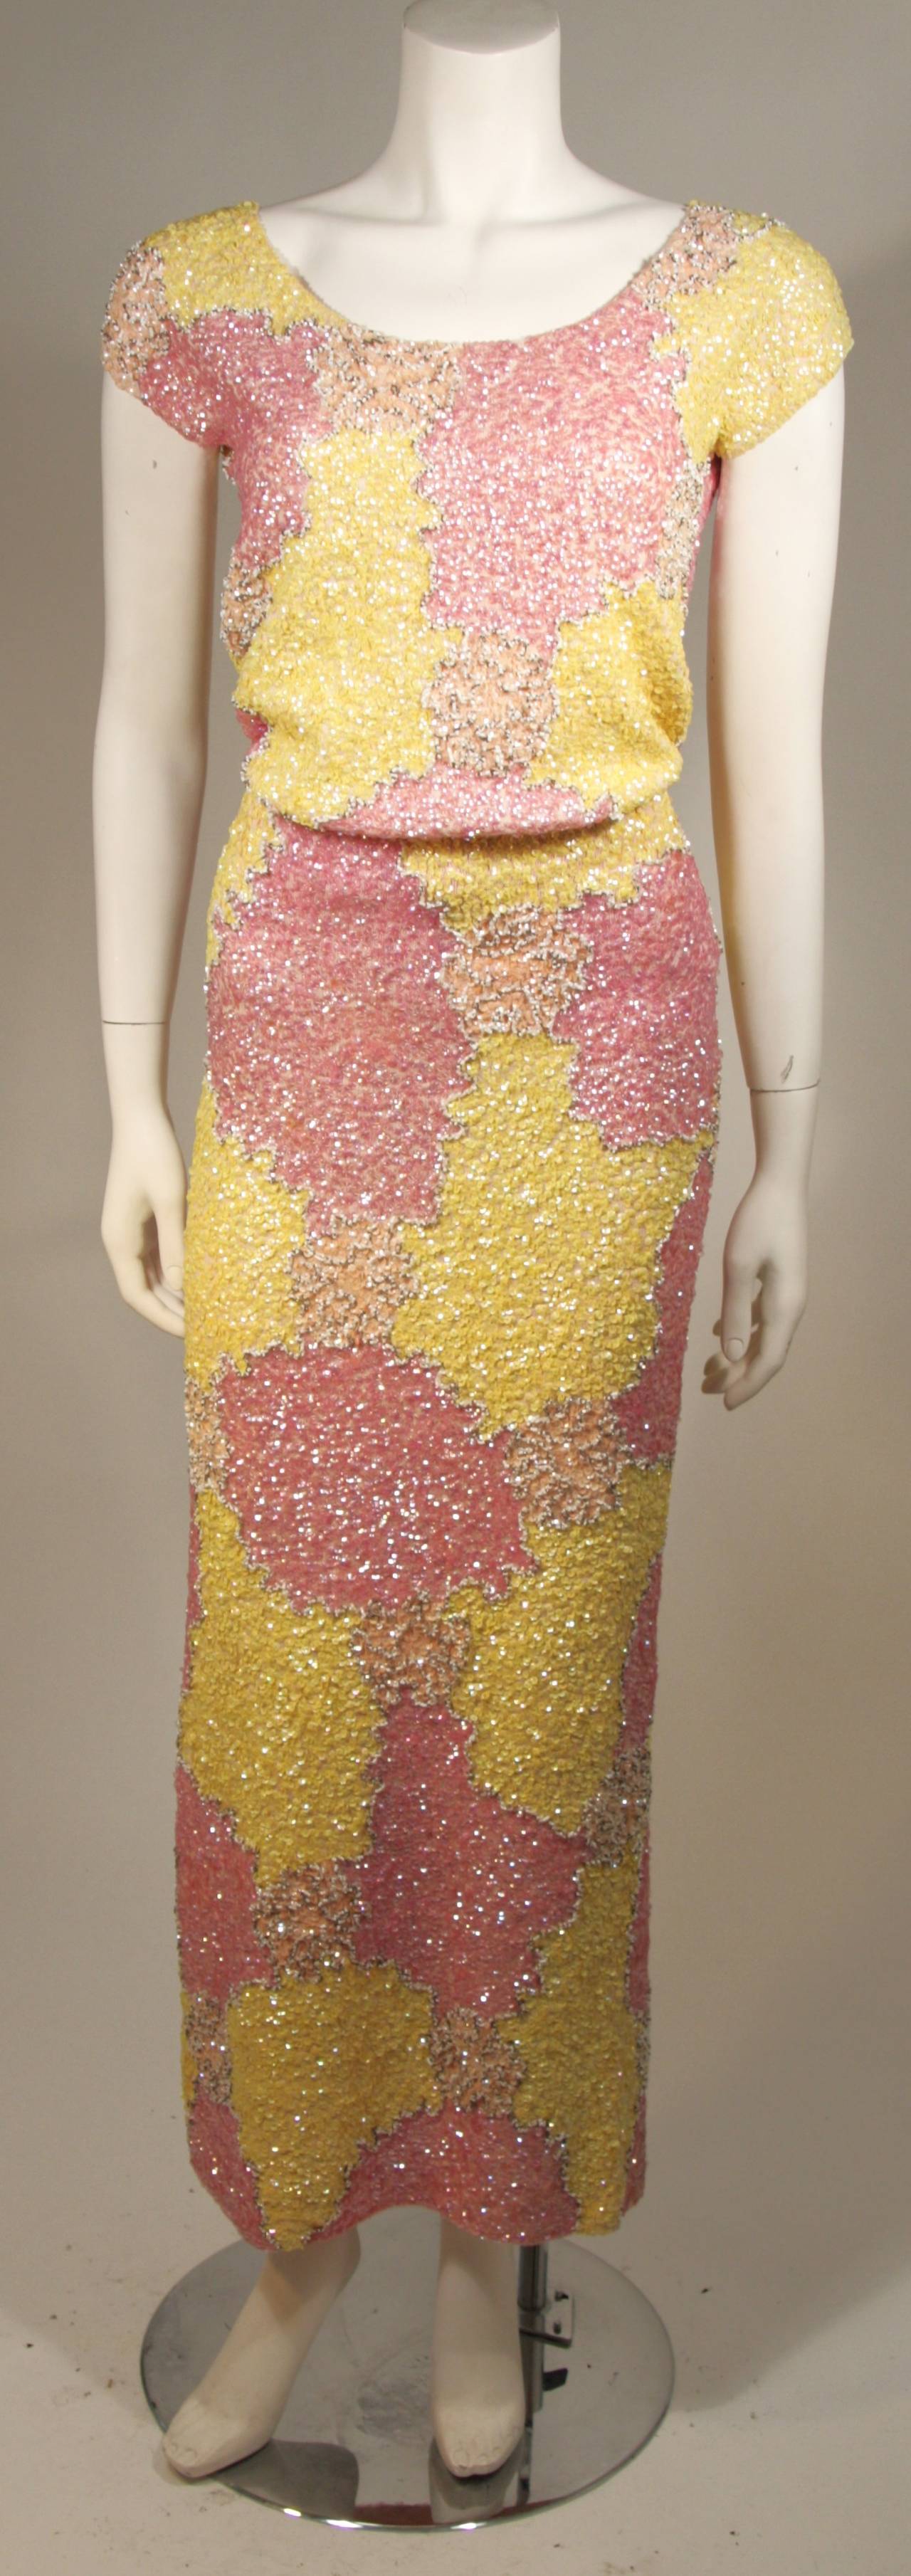 This lovely skirt set is composed of a stretch knit wool adorned with pink and yellow sequins. The top features a center back zipper. 

Measures (Approximately)
Top
Length: 16